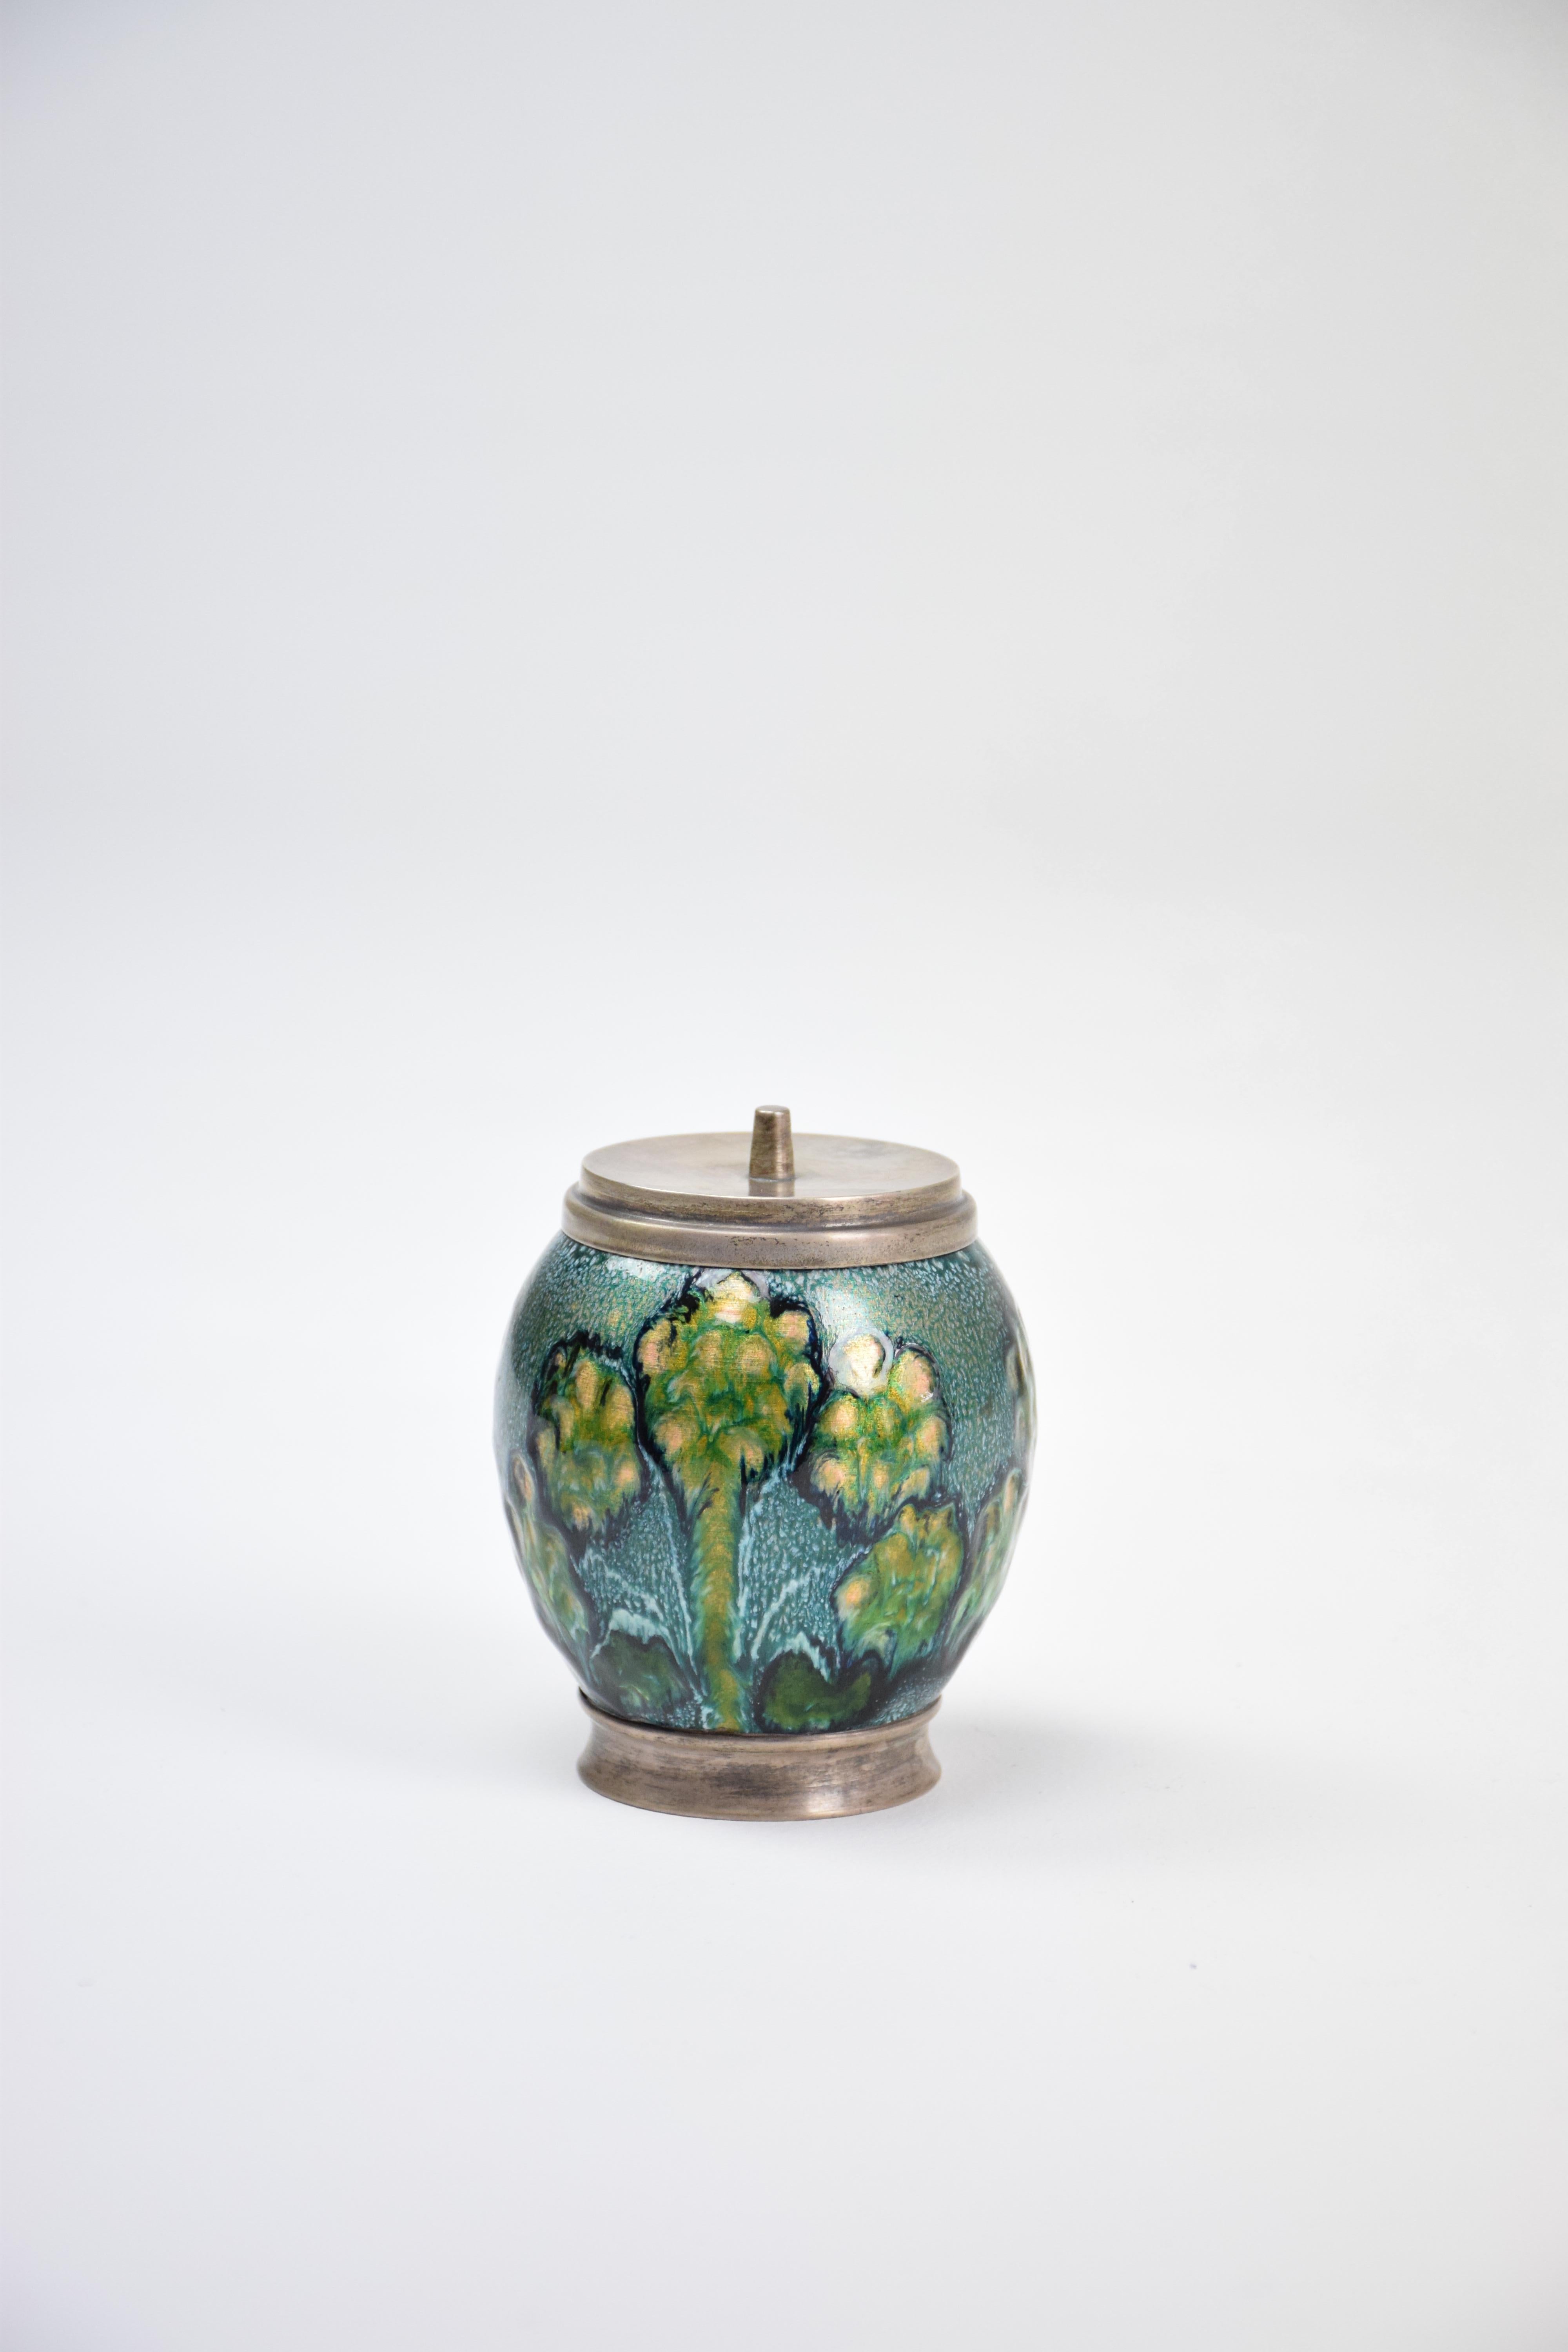 20th-century vintage lidded pot or box handcrafted with hand-painted detailed flowers in hues of blue, green and yellow. 
Spain, circa 1970s.
 